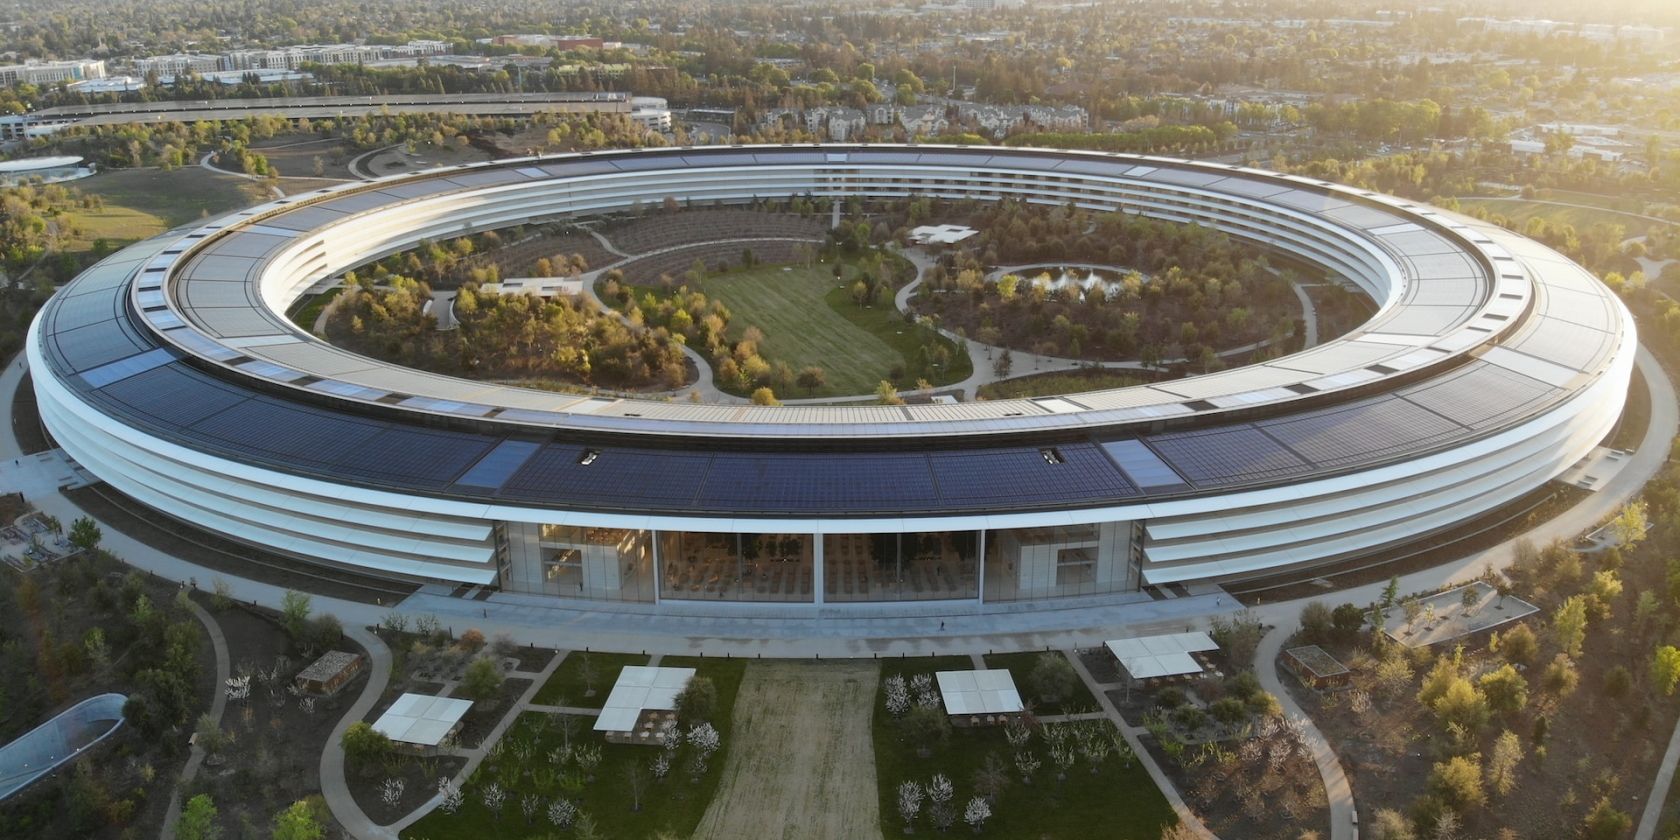 Apple spaceship campus in Cupertino